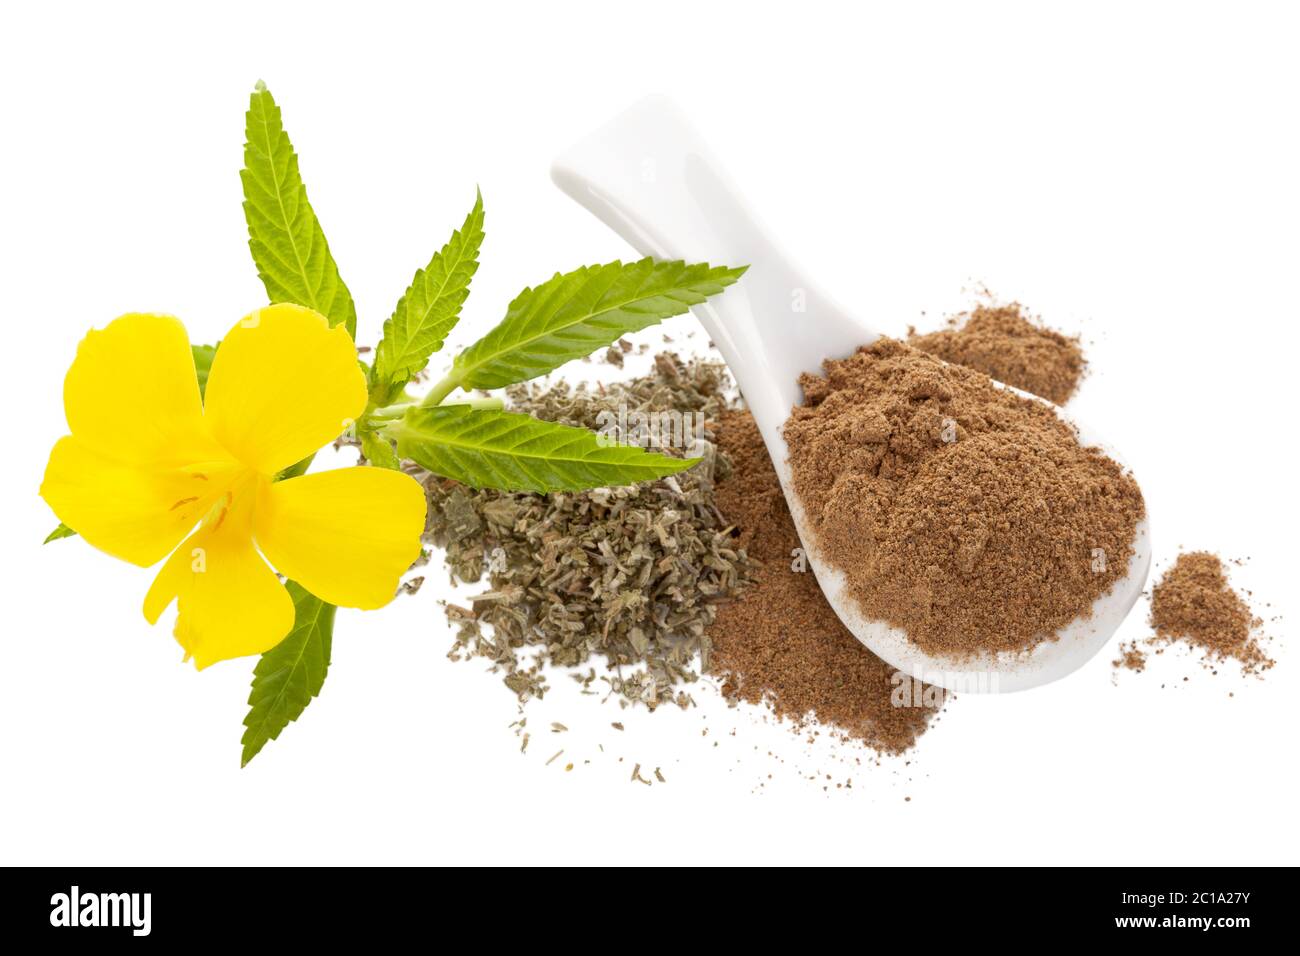 Damiana flower and damiana dried leaves and powder Stock Photo